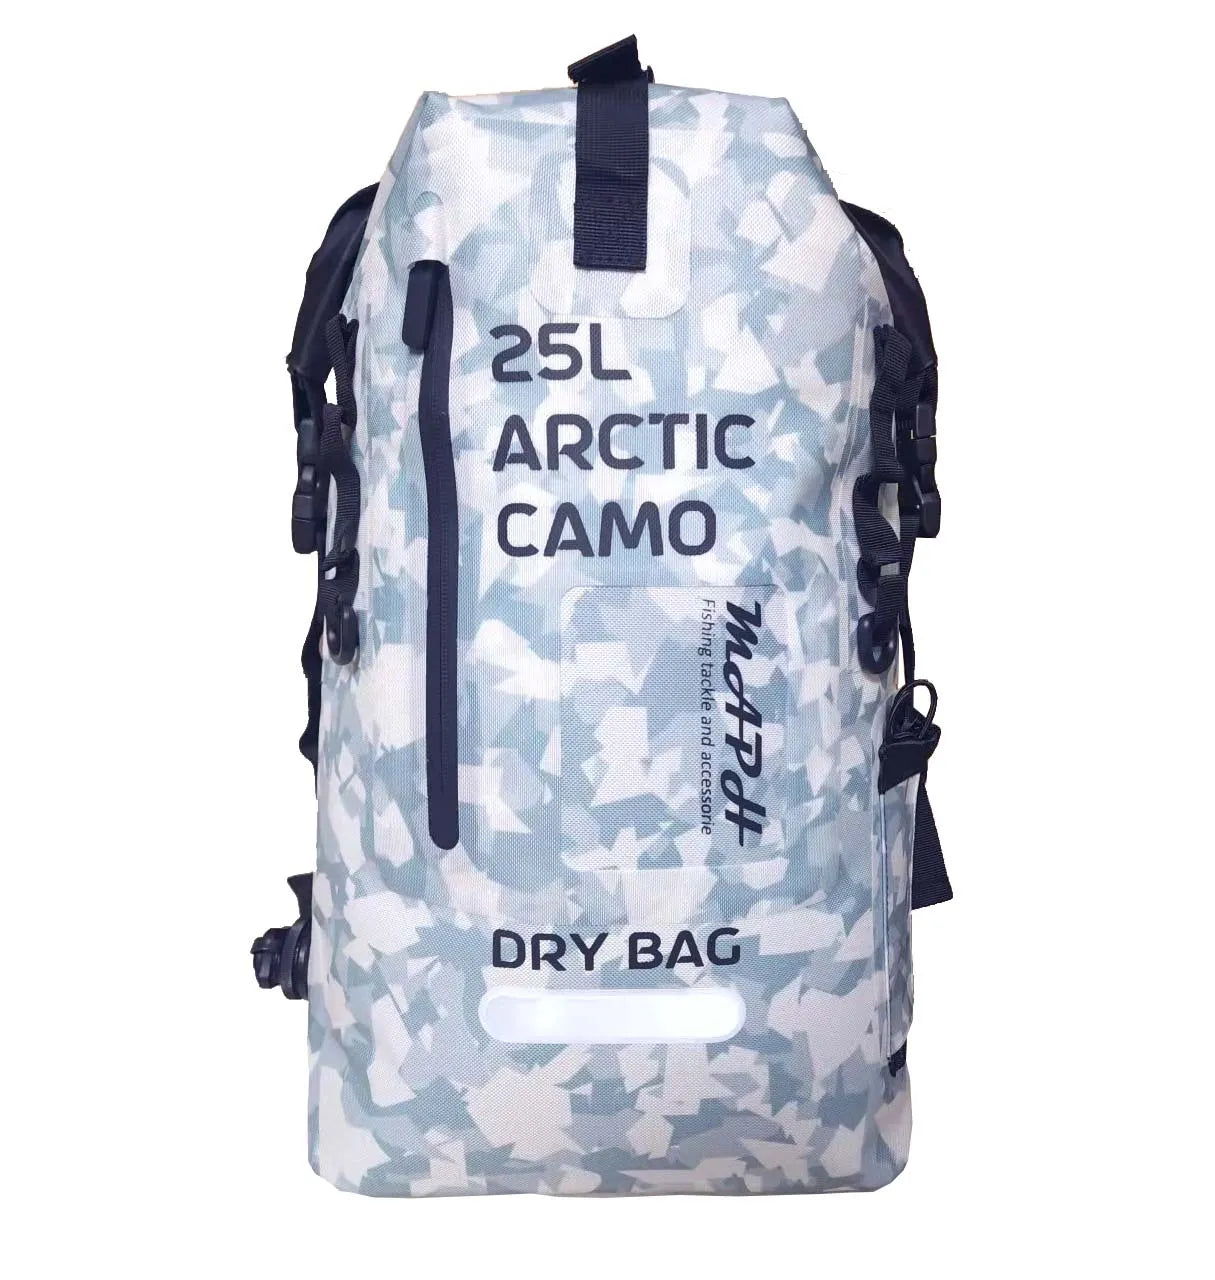 Maph Drybag Backpack 25L Artic Camo - Compleat Angler Nedlands Pro